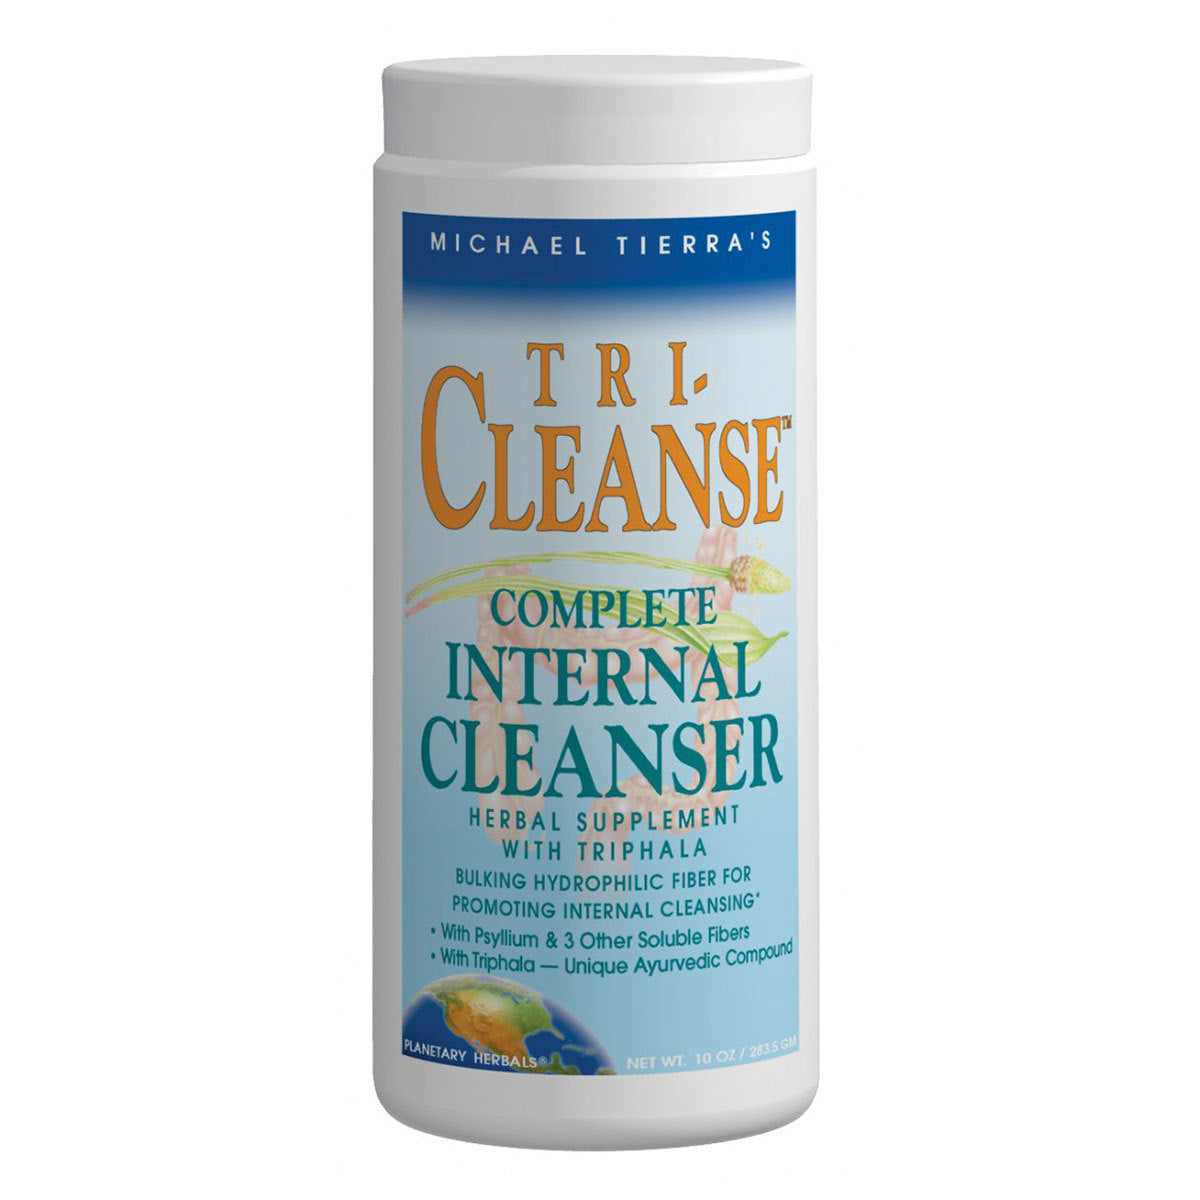 Primary image of Tri-Cleanse Complete Internal Cleanser